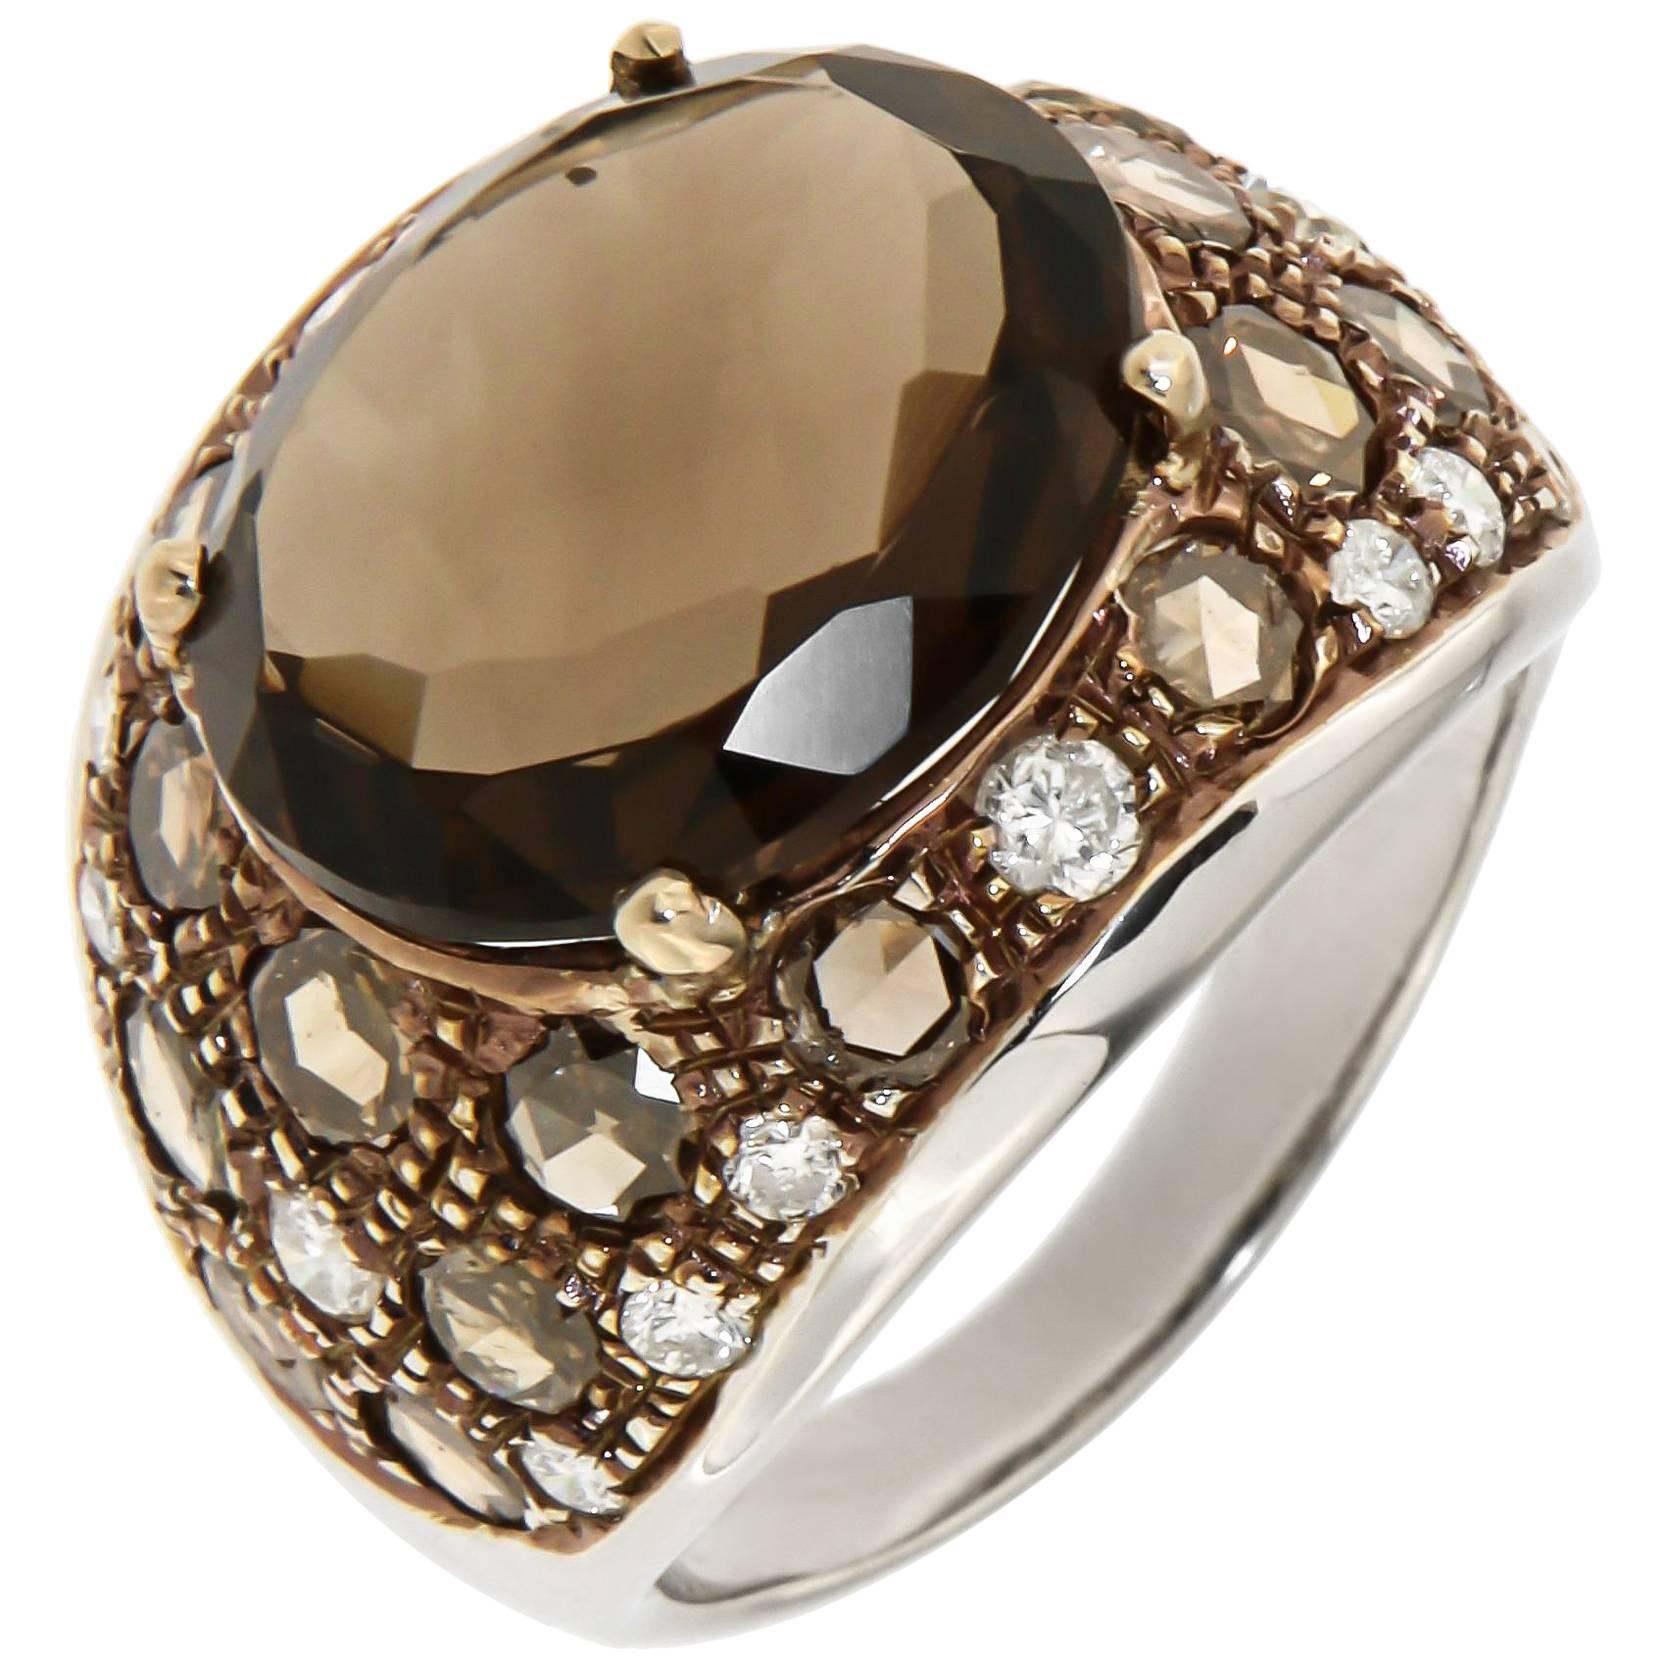 White Brown Diamonds Citrine 18 Karat Gold Cocktail Ring Handcrafted in Italy